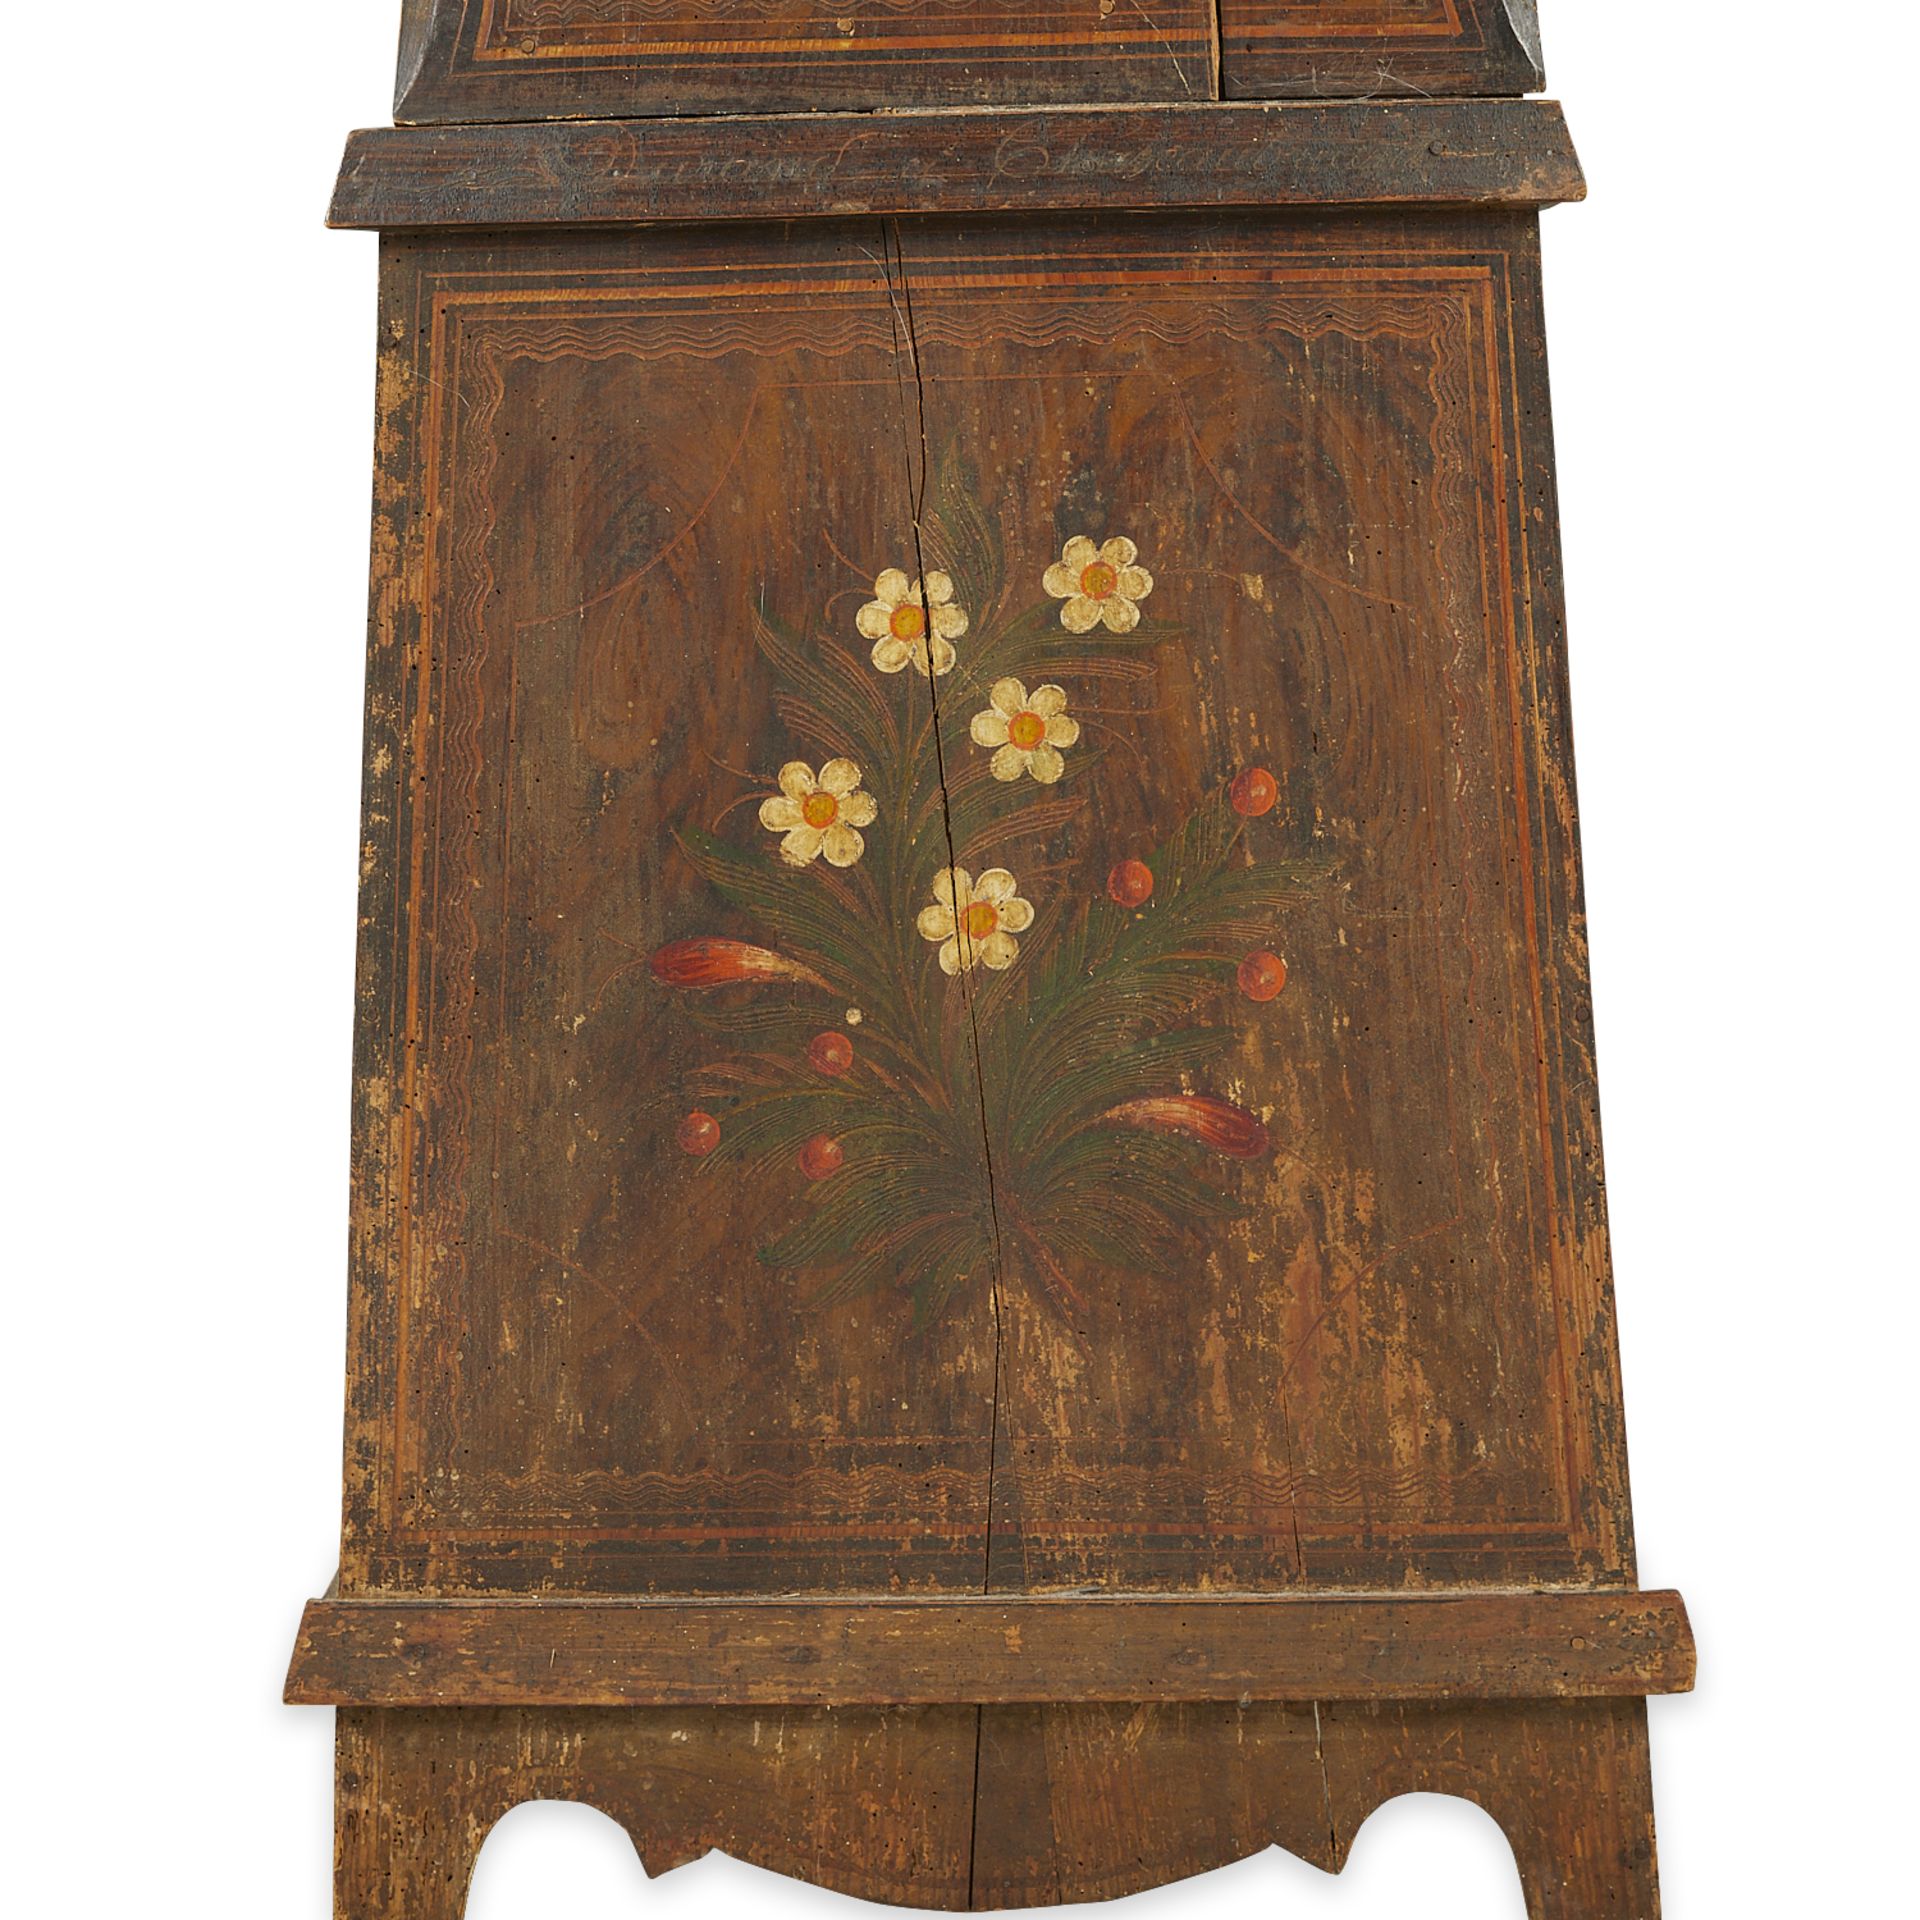 Delarue French Country Painted Grandfather Clock - Image 21 of 22